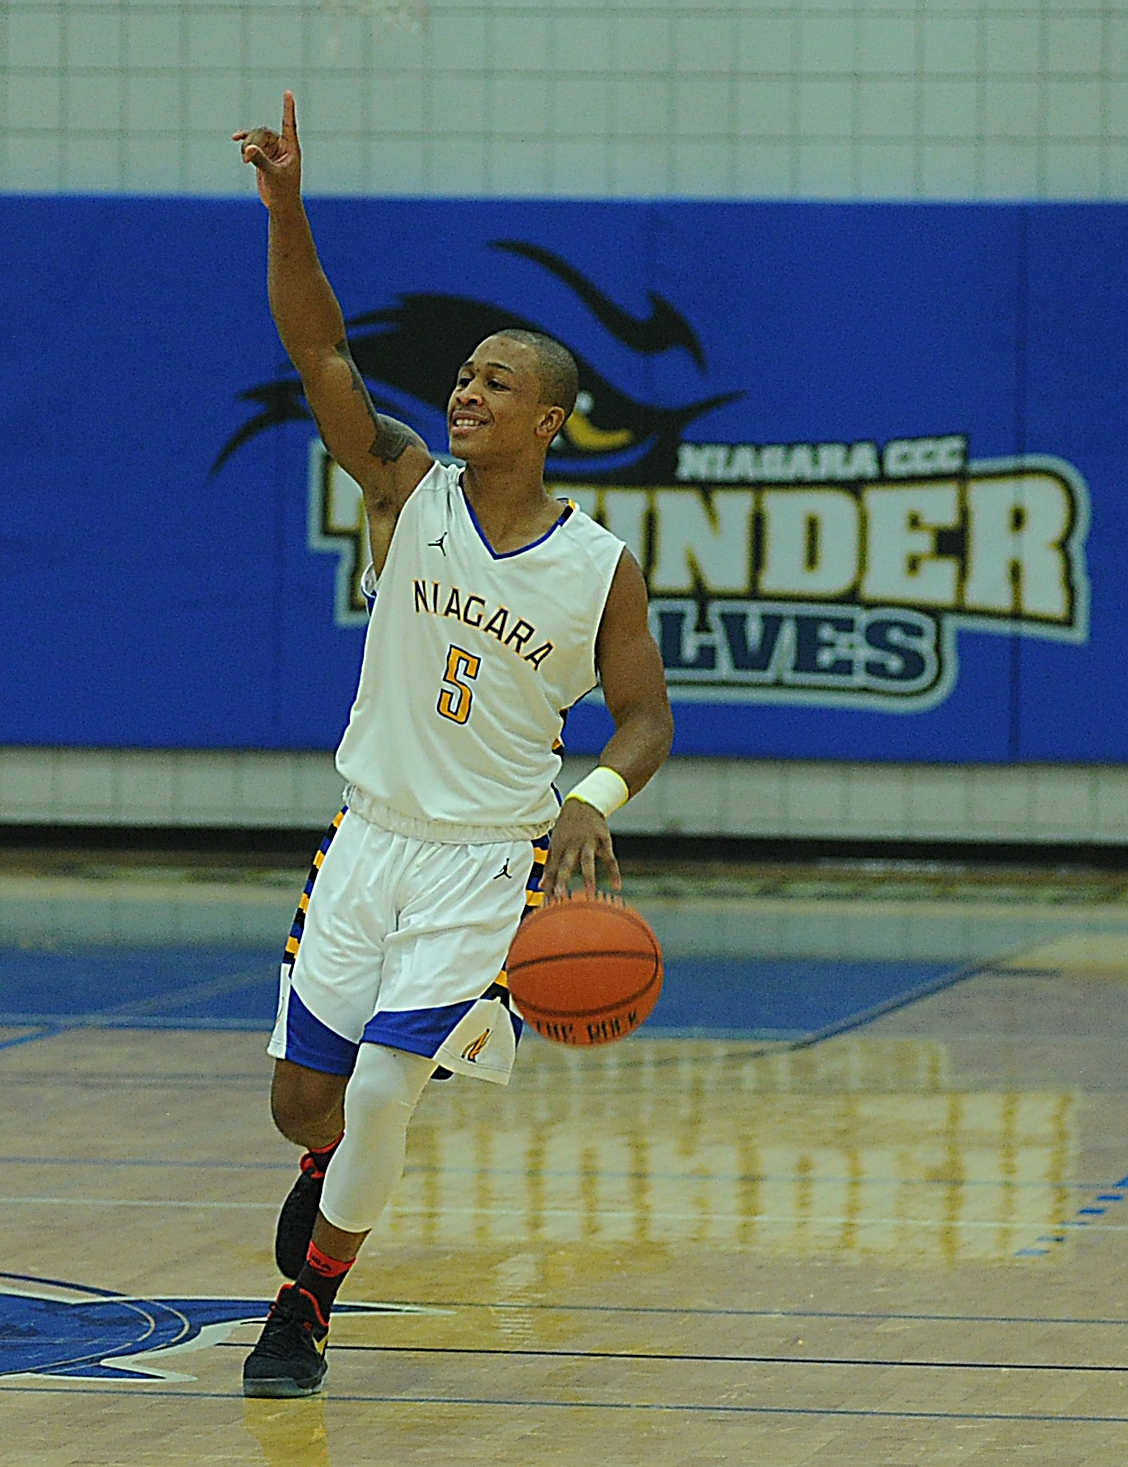 NCCC drops second straight